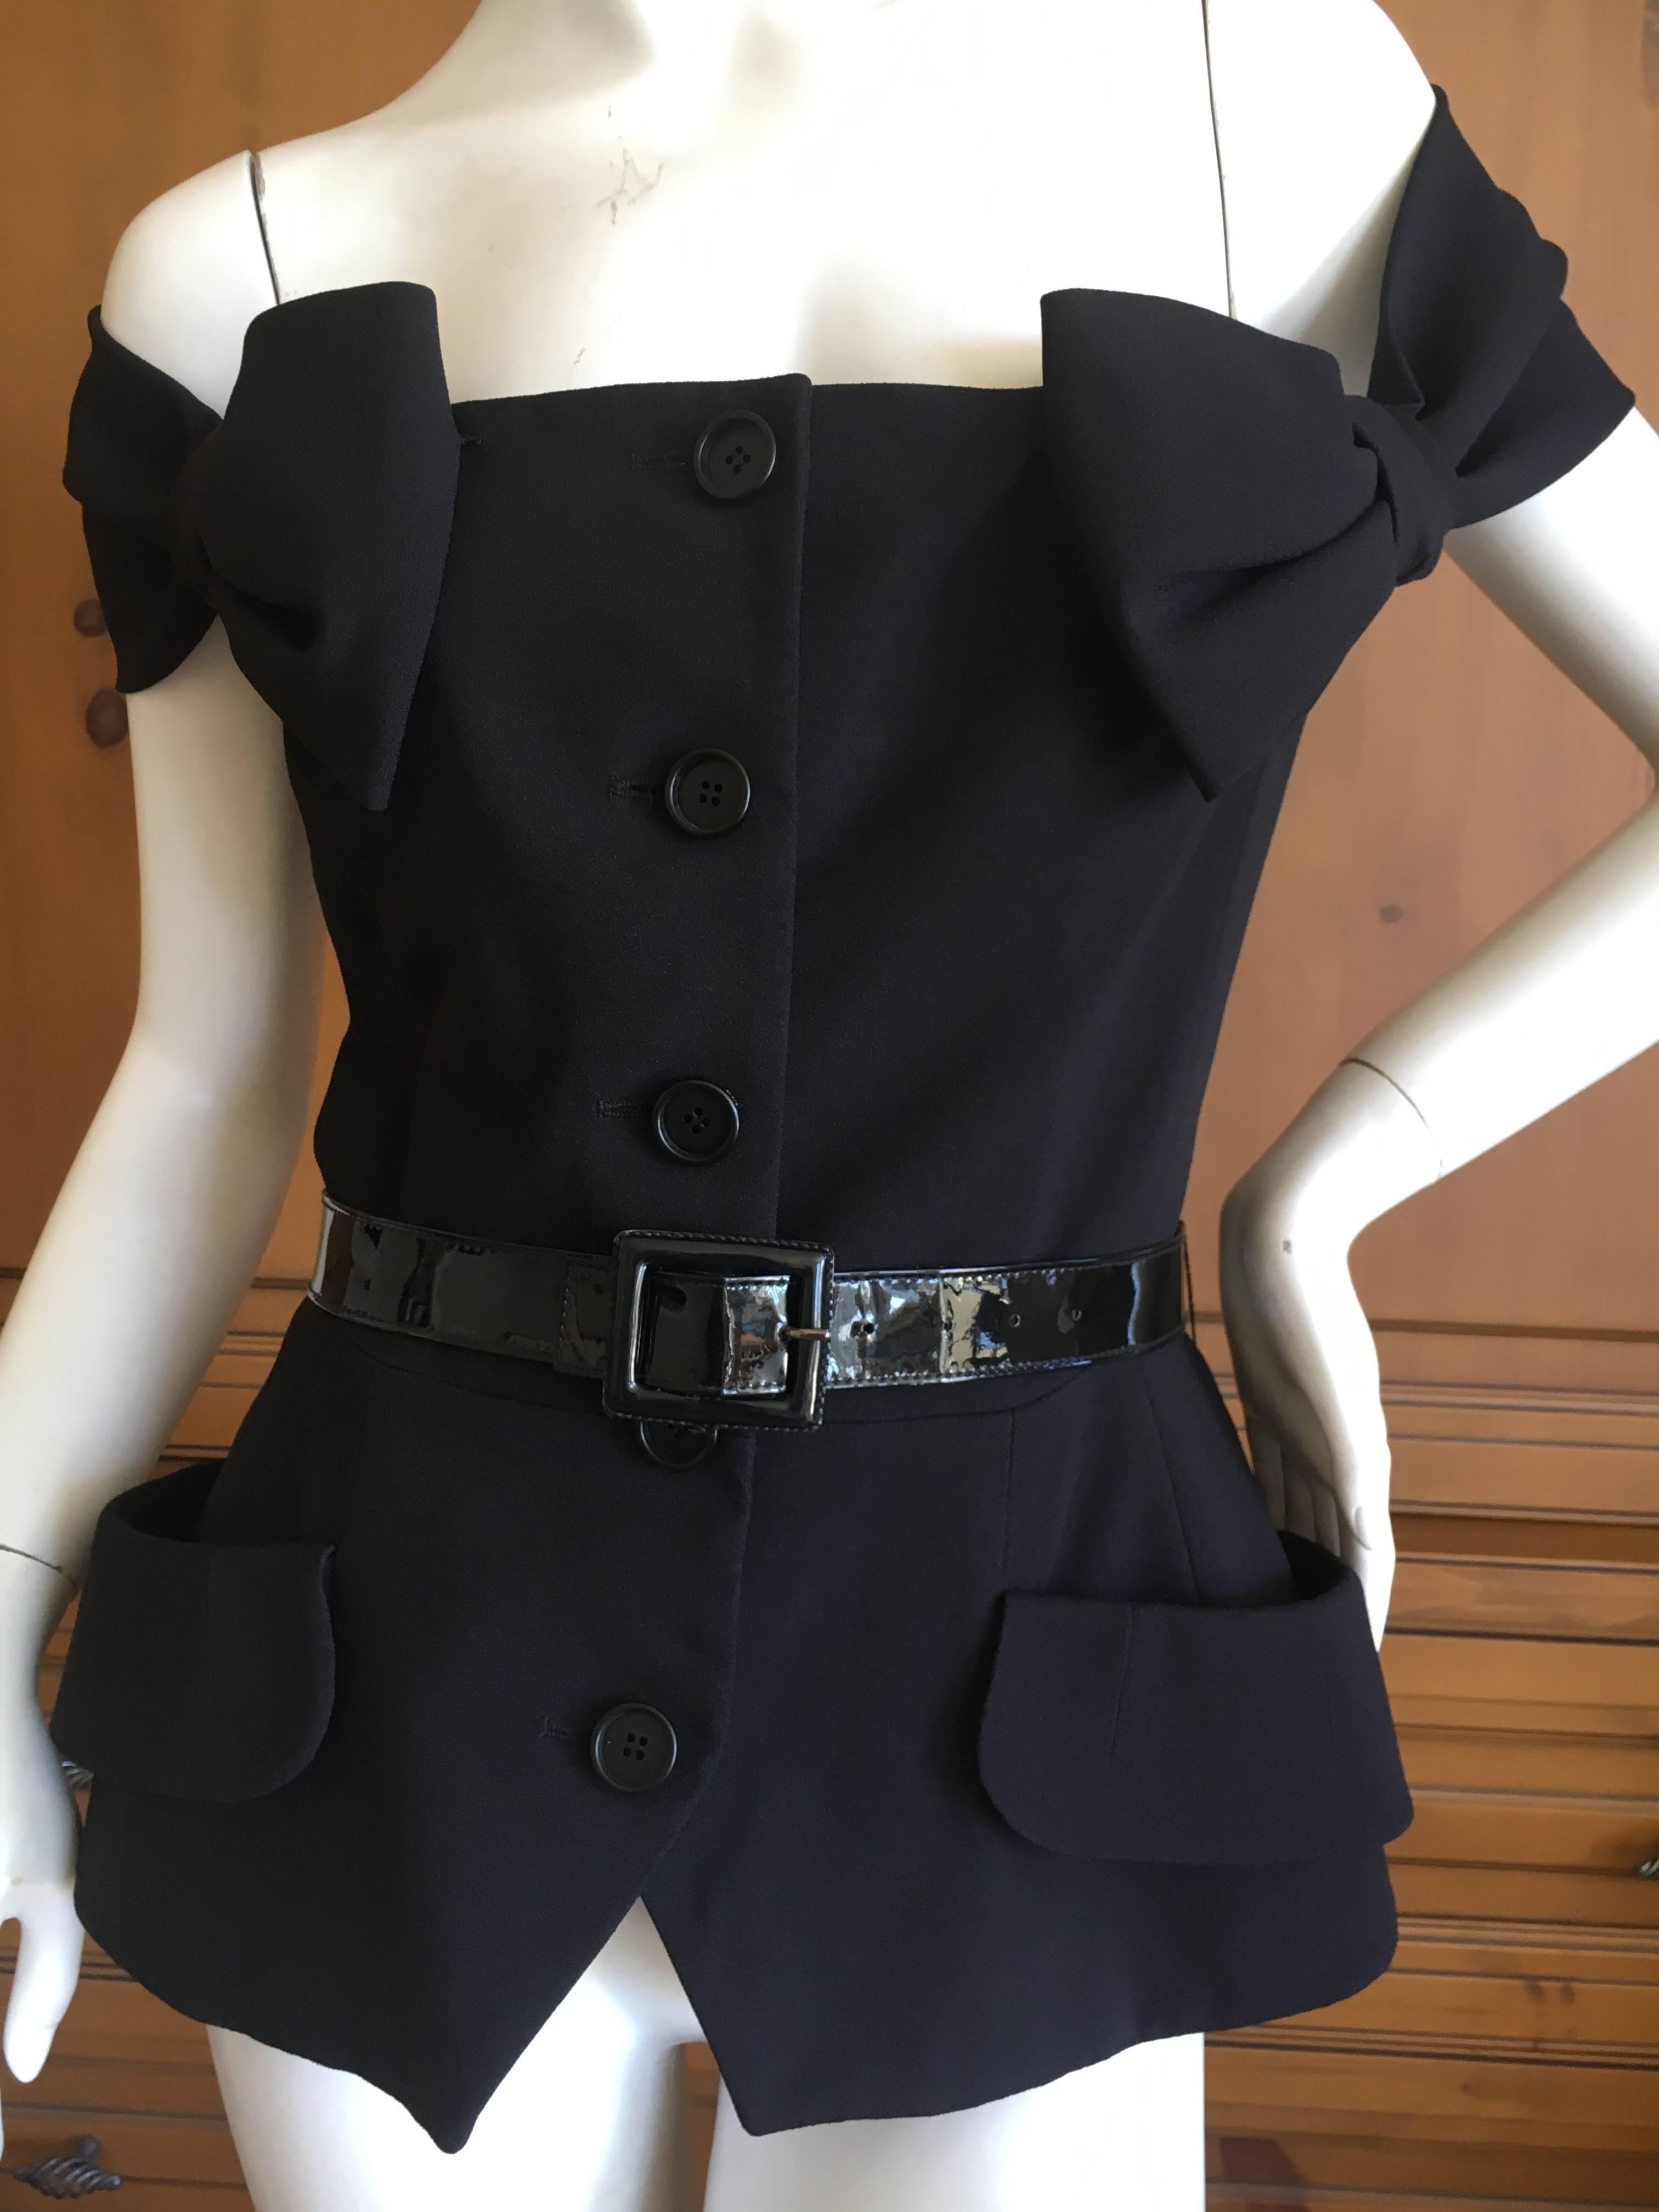 Christian Dior by John Galliano 2011 Black Off the Shoulder Jacket with Bows.
So chic, pure Galliano.
The original belt is gone, I am including a YSL Rive Guache belt in black patent leather, as seen in the photos.
Size 42
Bust 36"
Waist